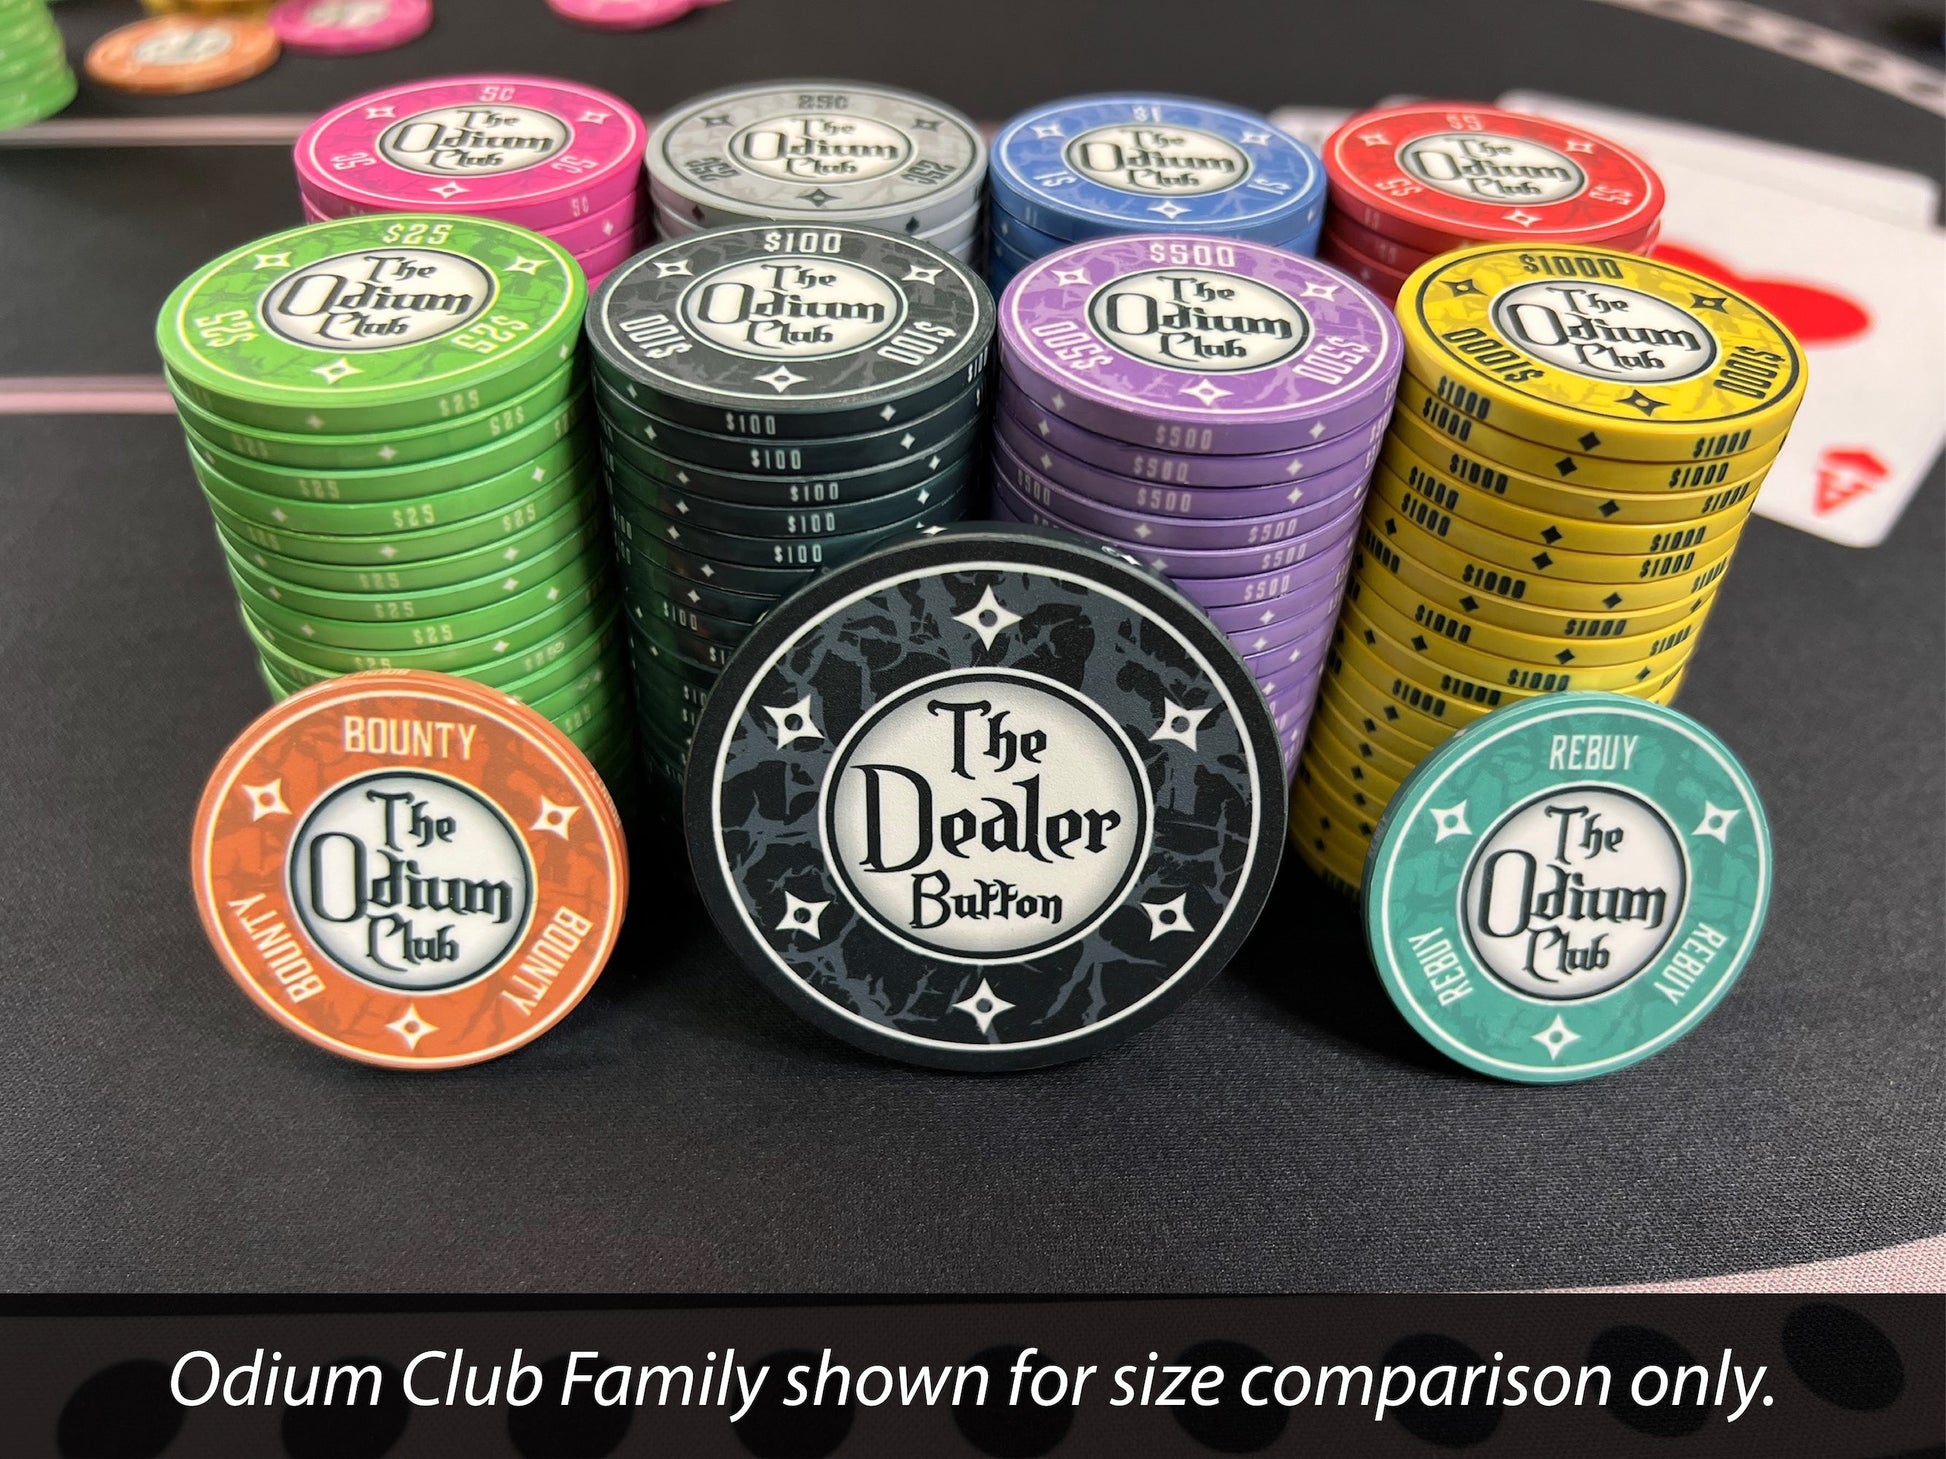 Shown here are all 8 denominations of Odium Club poker chip in stacks, the Odium Club Rebuy 43mm chip, the Odium Club Bounty 43mm chip, and the 60mm (2.36 inch) Odium Club Dealer Button. The 39mm chips and the 43mm bounty and rebuy chips are 3.3mm thick--which is the standard poker chip thickness. The dealer button is .223-inch or 5.66mm thick. Available in 5¢ pink, 25¢ gray, $1 blue, $5 red, $25 green, $100 black, $500 purple, and $1000 yellow. Few offer matching poker chips and dealer buttons.